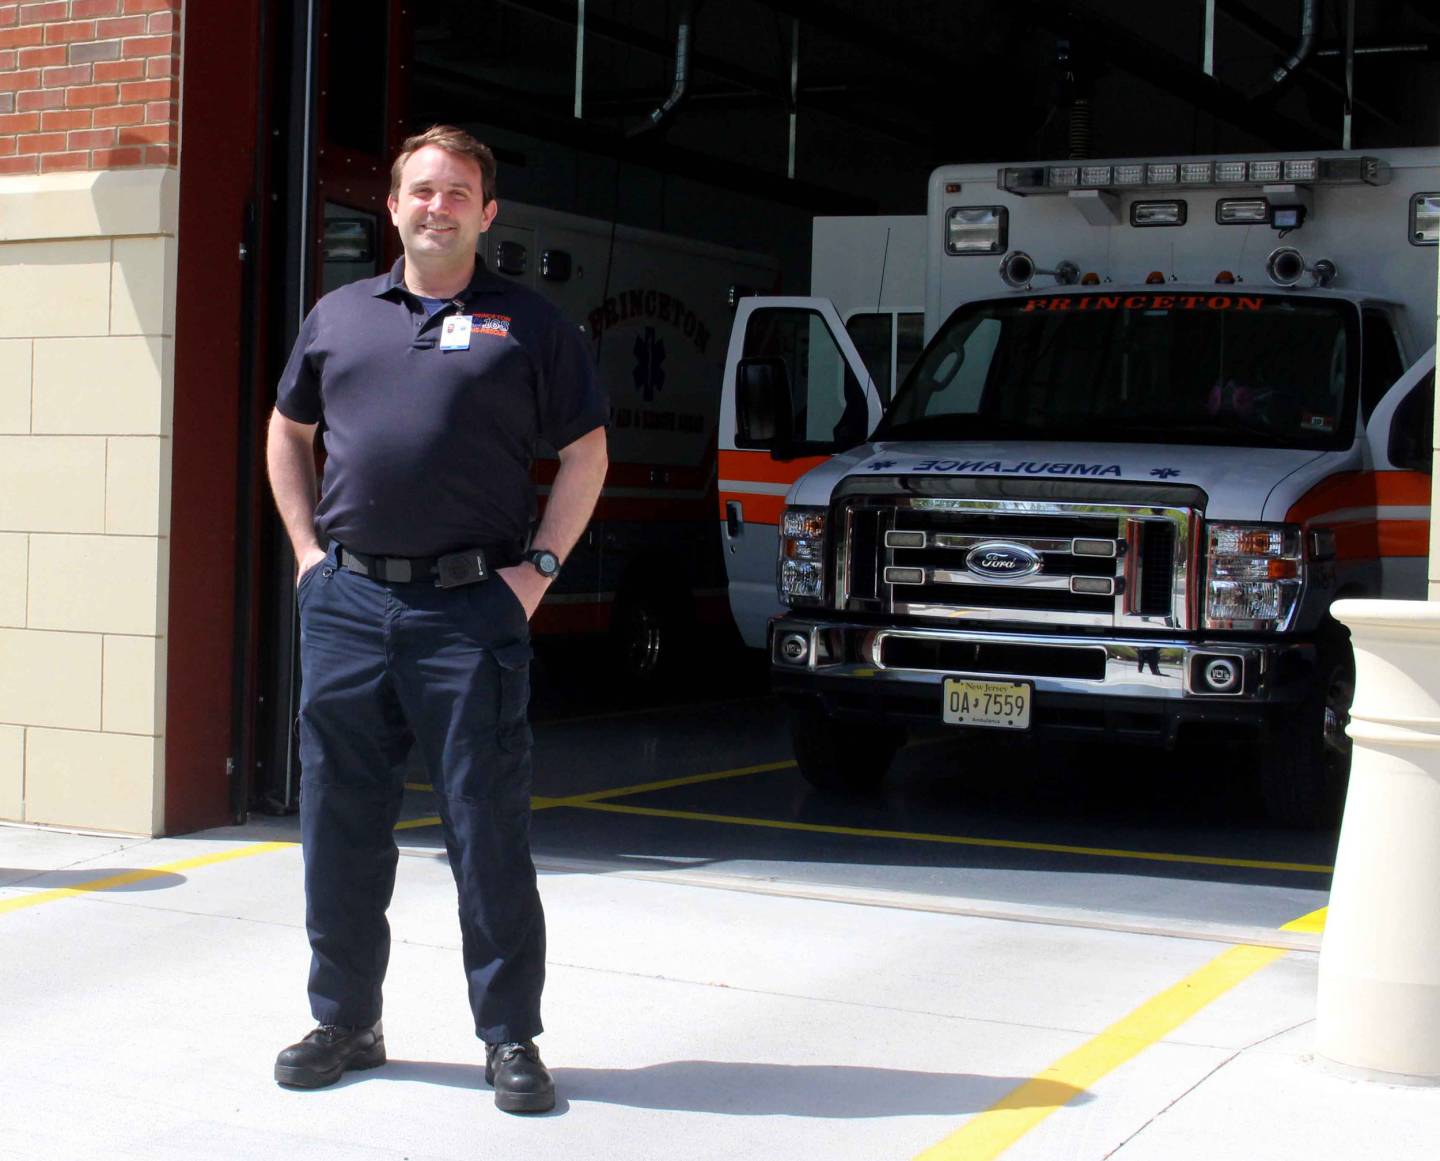 Eric Mills stands in front of an ambulance